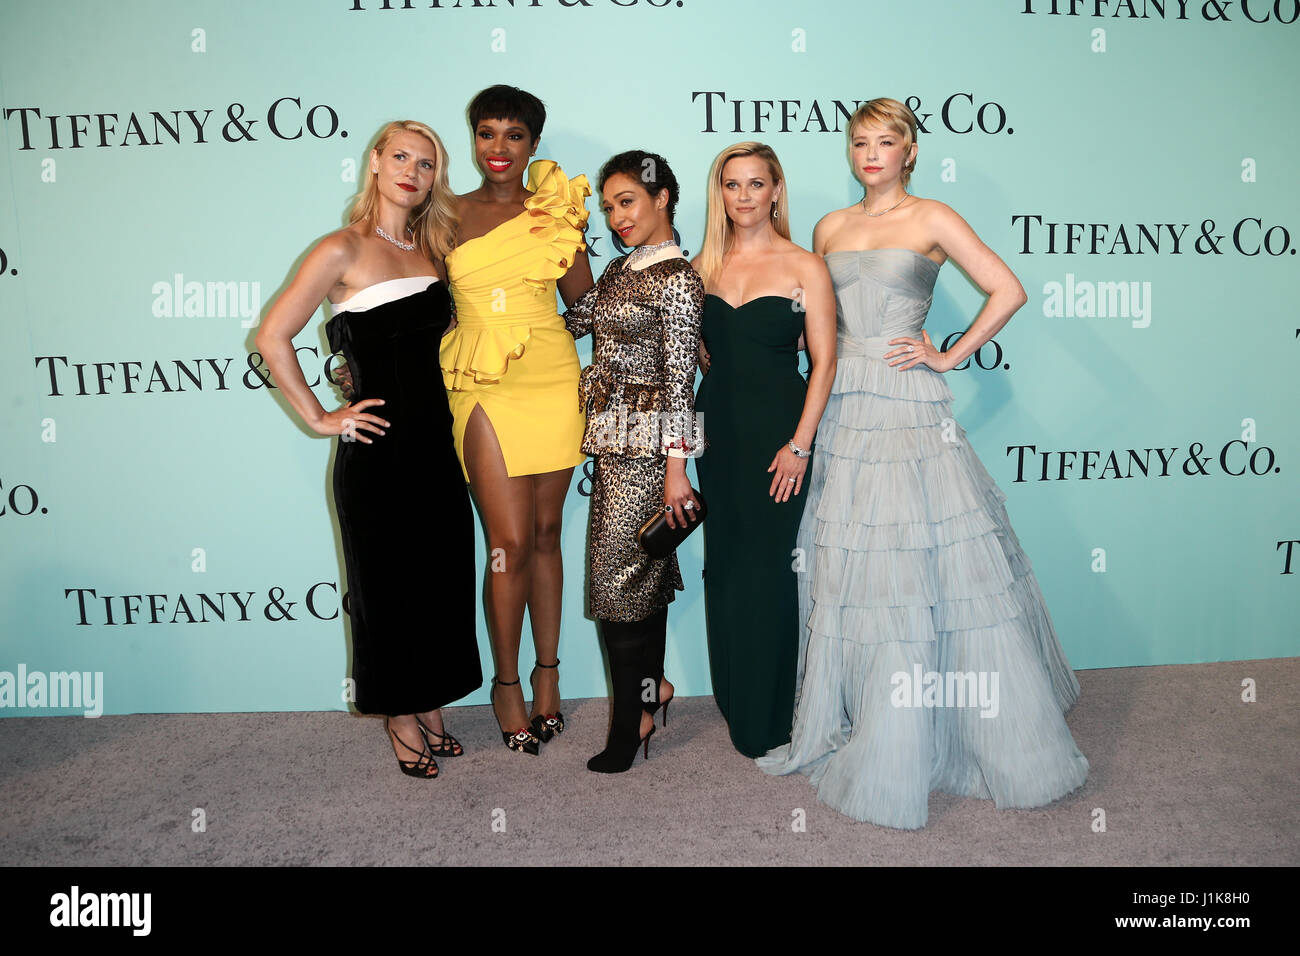 (L-R) Claire Danes, Jennifer Hudson, Ruth Negga, Reese Witherspoon and Haley Bennett attend the Tiffany & Co. 2017 Blue Book Gala at St. Ann's Warehouse on April 21, 2017 in Brooklyn, New York. Stock Photo